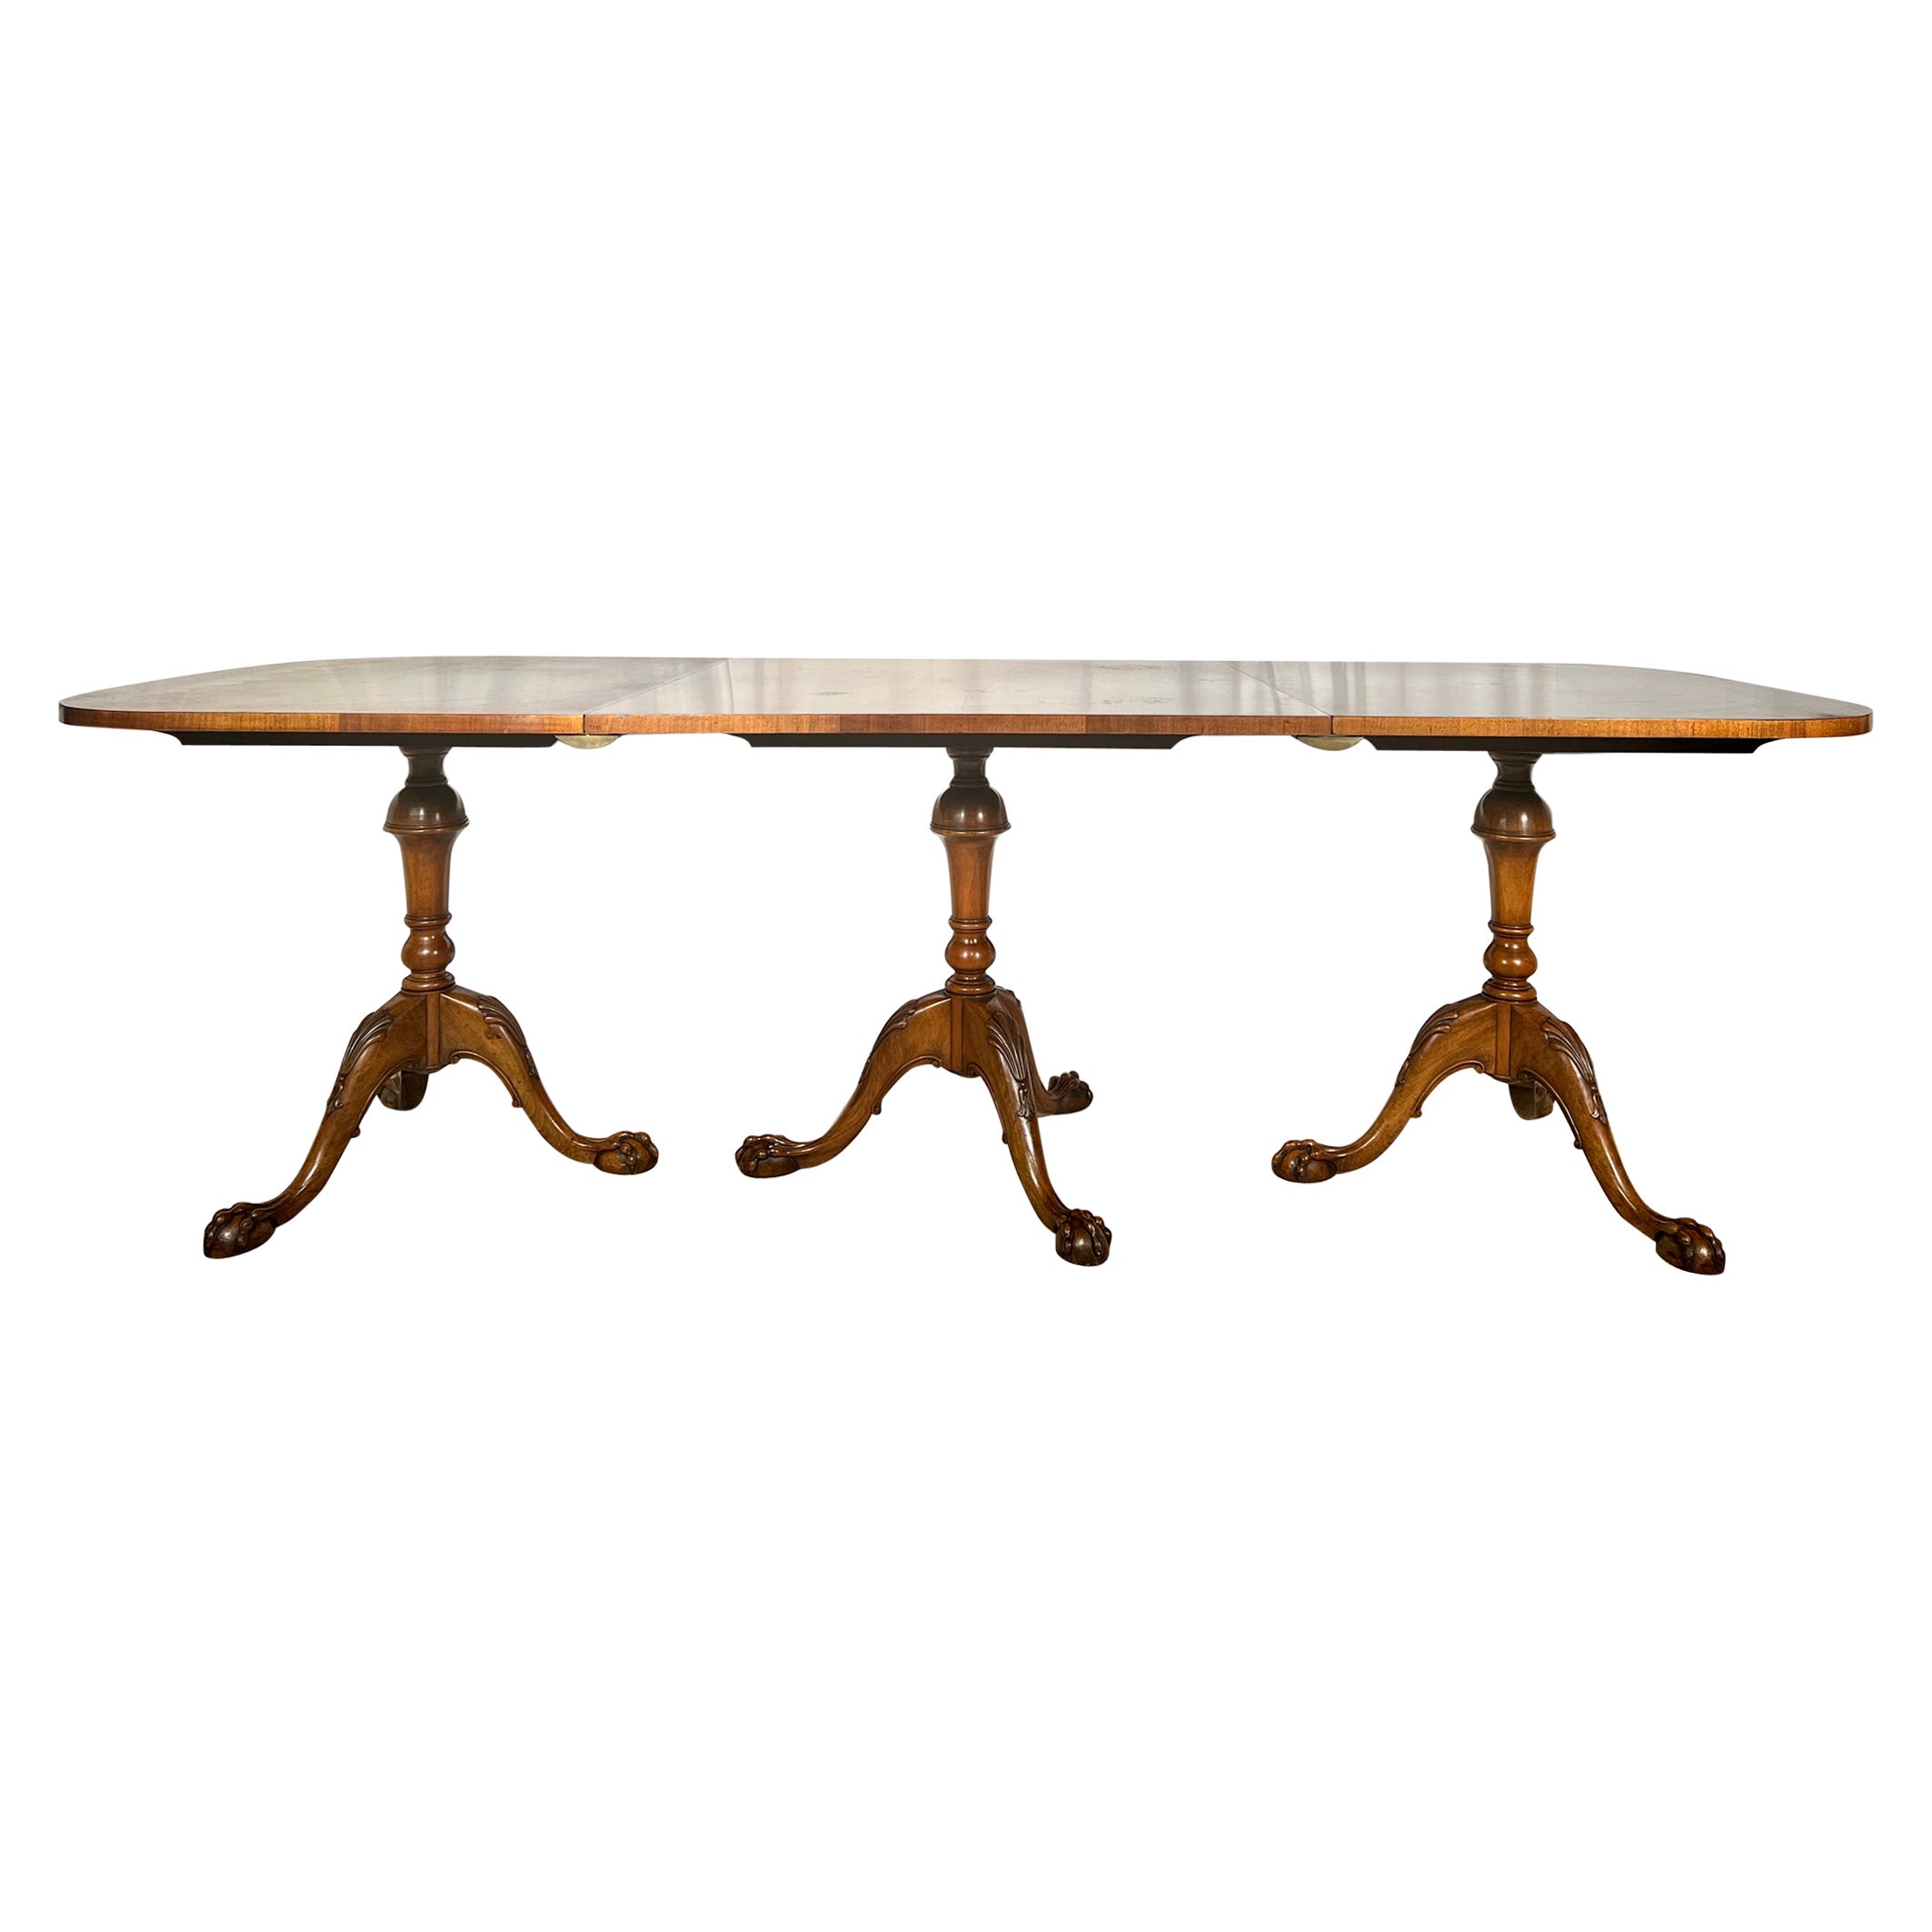 Antique English Burl Walnut Dining Table circa 1890 For Sale